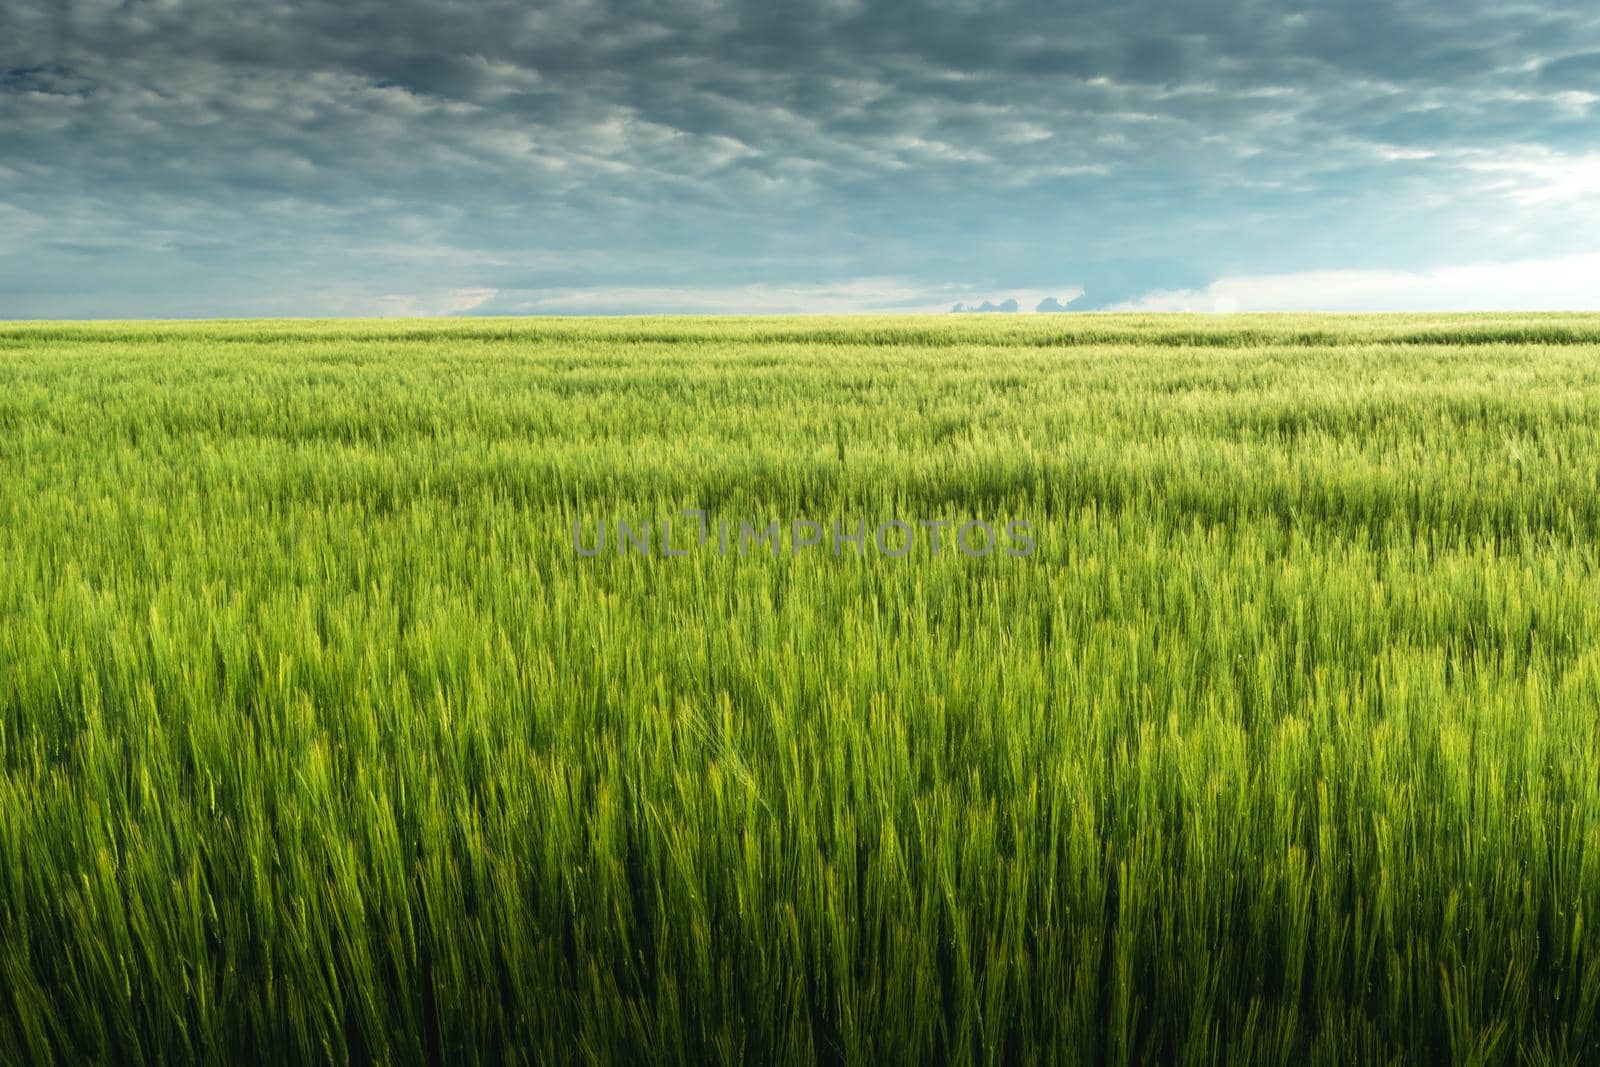 Green barley field and cloudy gray sky, rural view